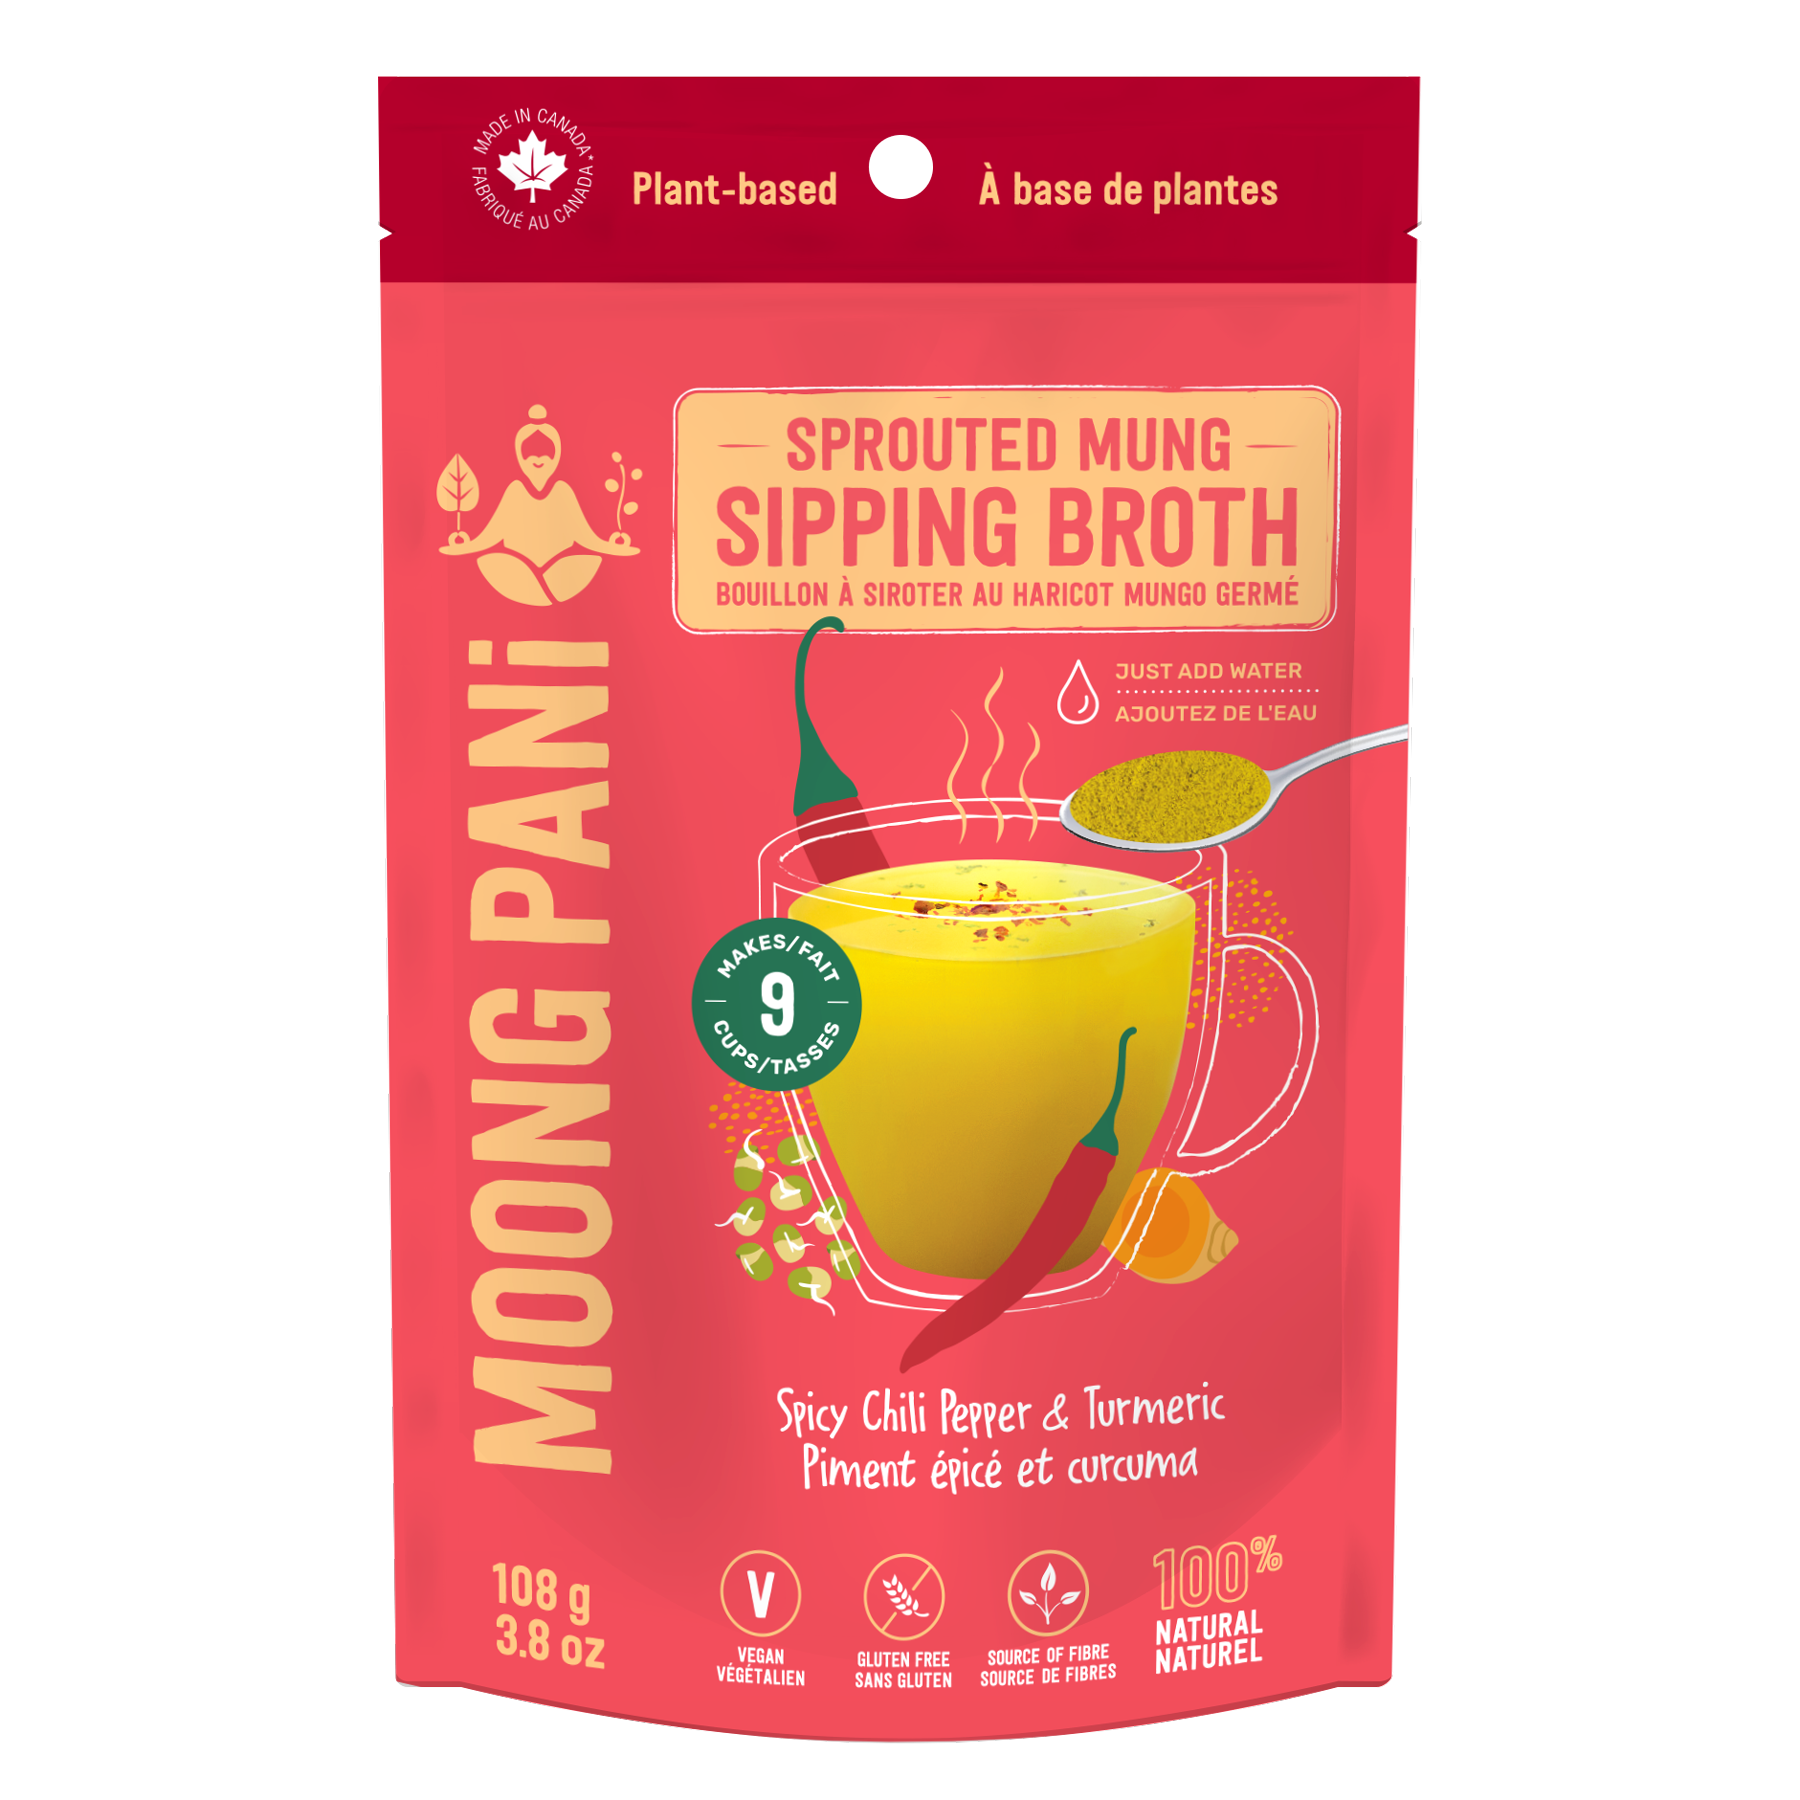 Spicy Chili Pepper & Turmeric Sprouted Mung Broth - 9 servings